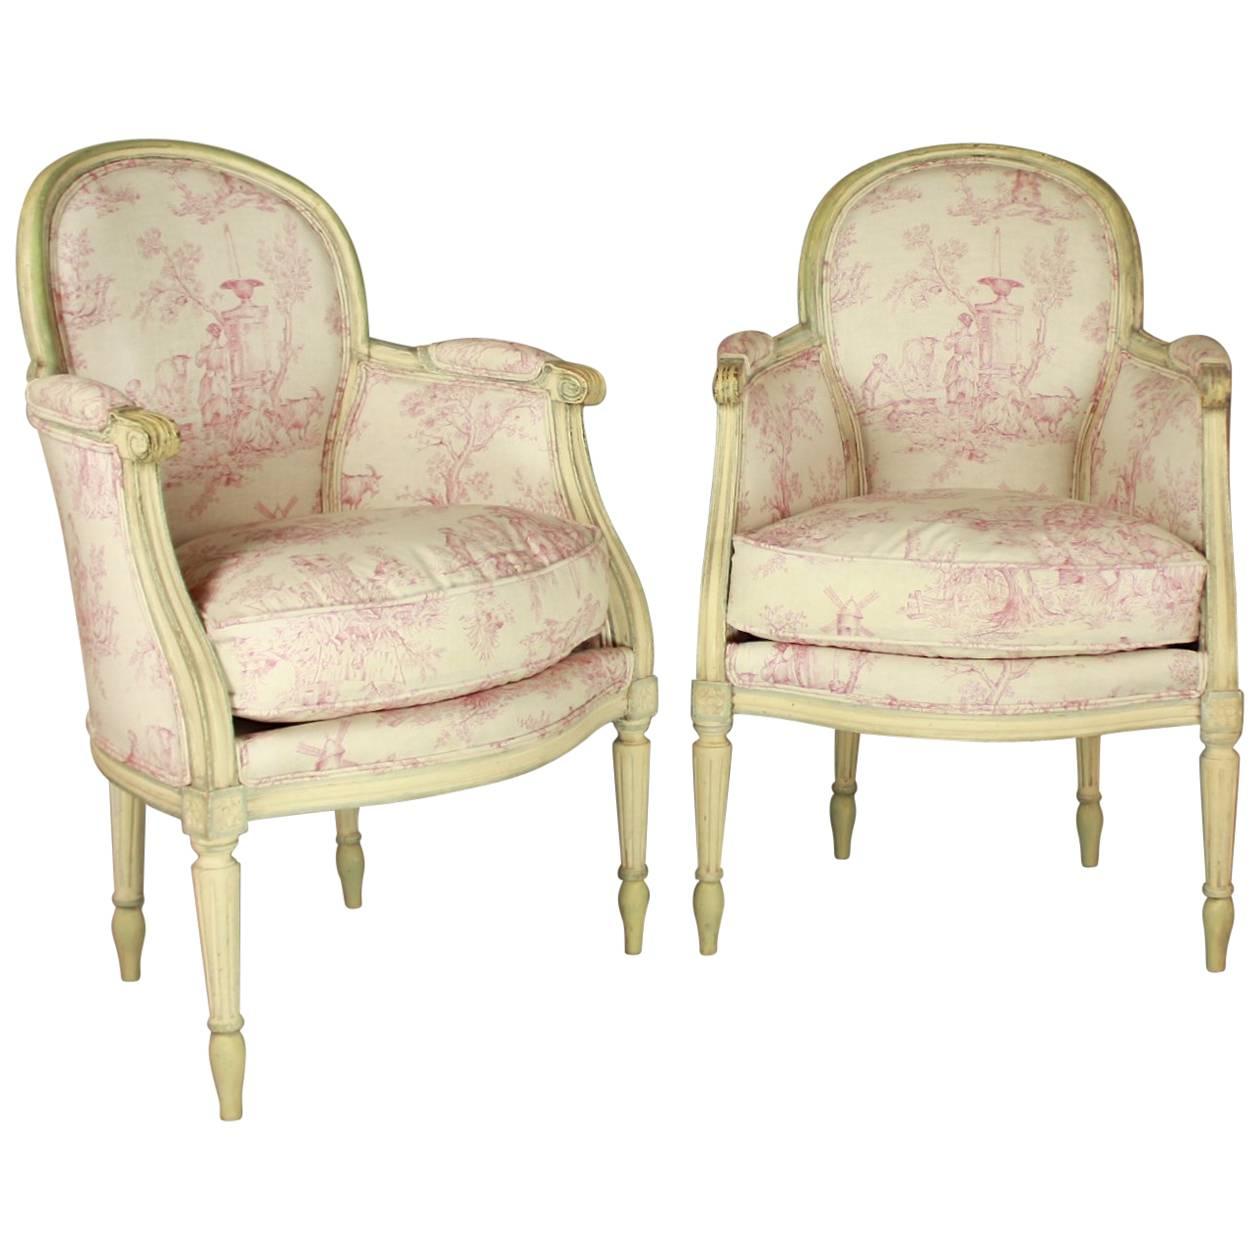 Pair of French 19th Century Louis XVI Style Painted Wood Armchairs or Bèrgères